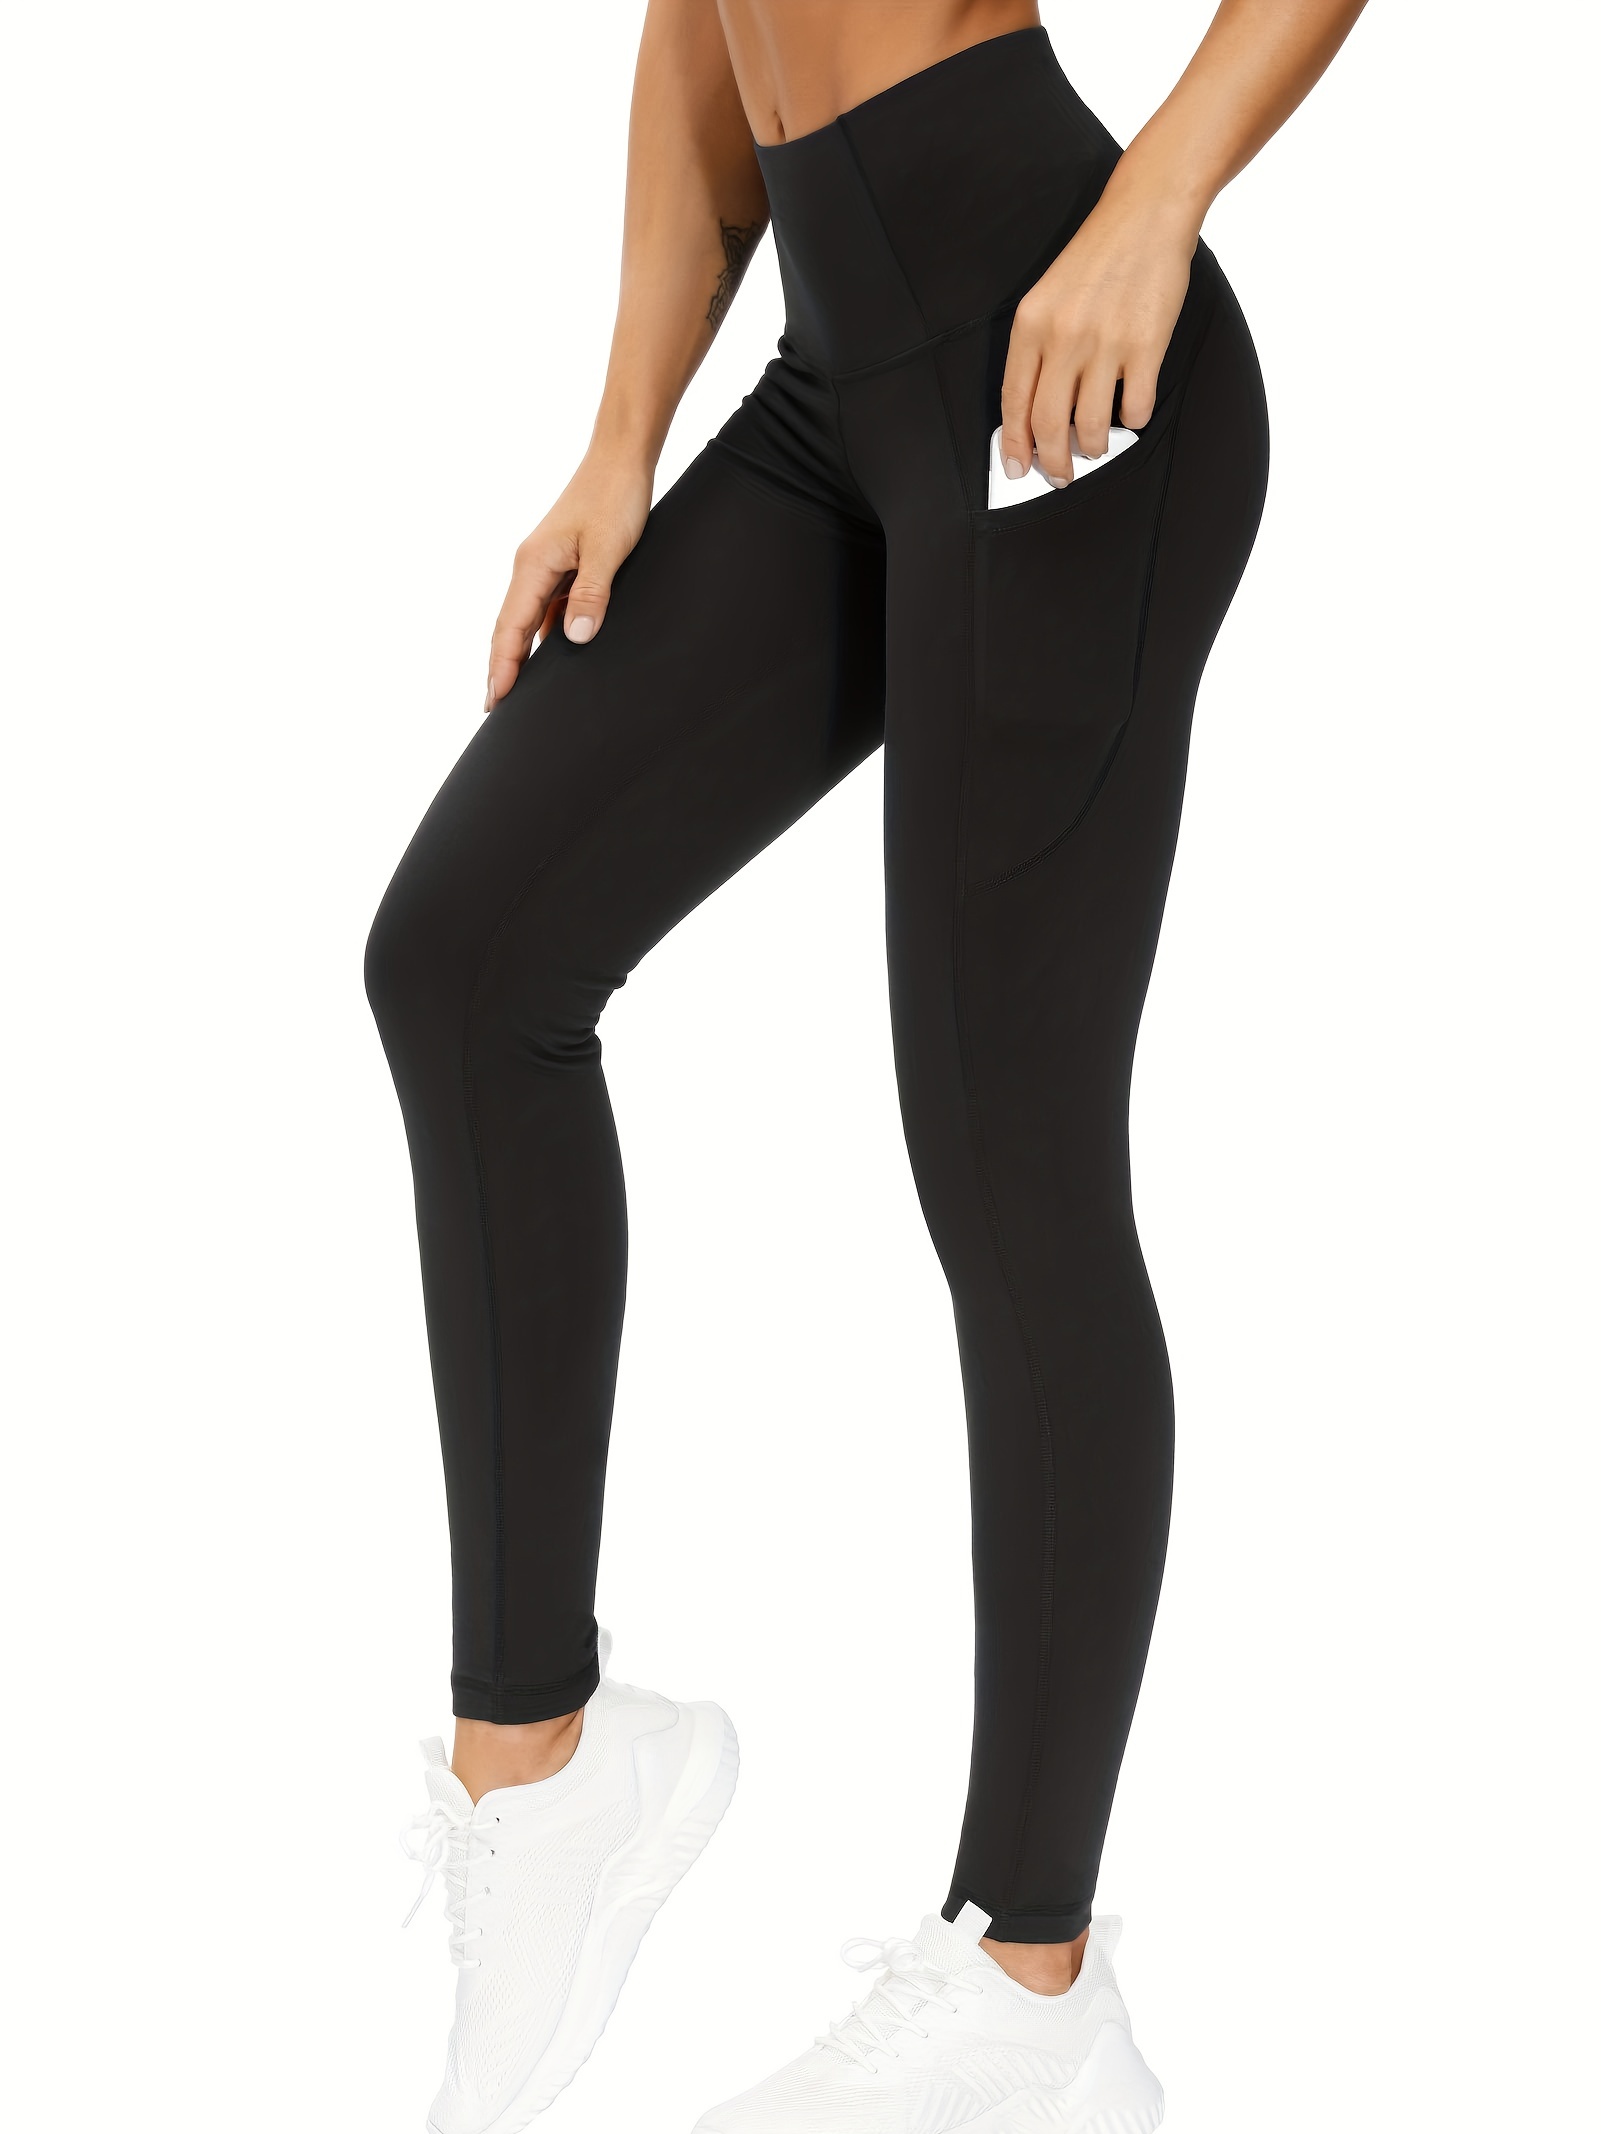 Lactra Broad belt with Pocket Yoga Pant Slim fit Black Yoga Gym Zumba  Workout Leggings for Women's